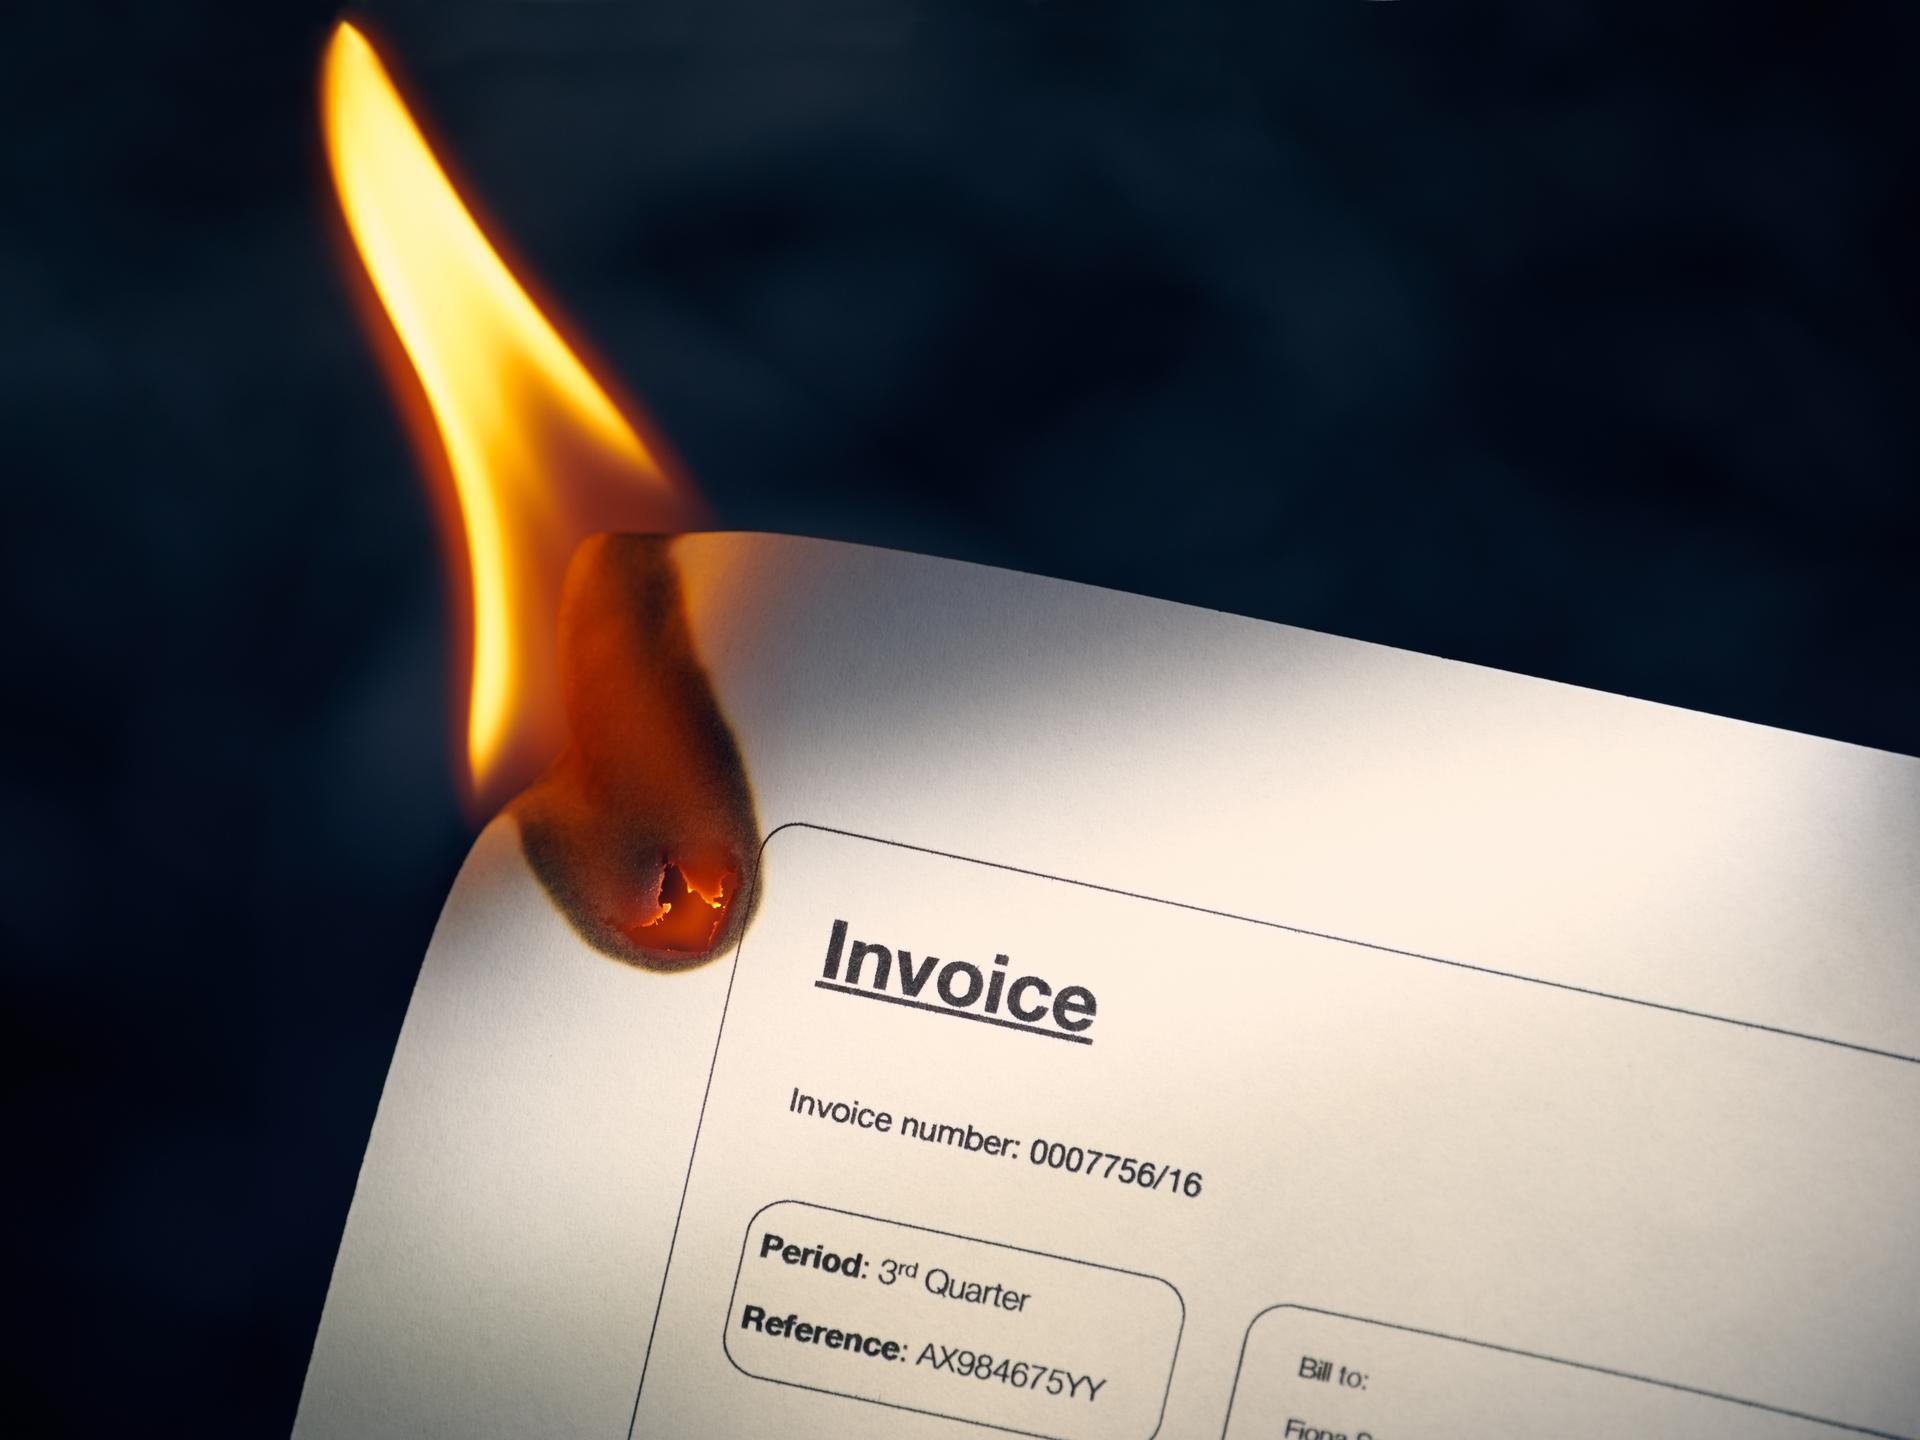 Invoices are customer facing documents - don't burn your trust